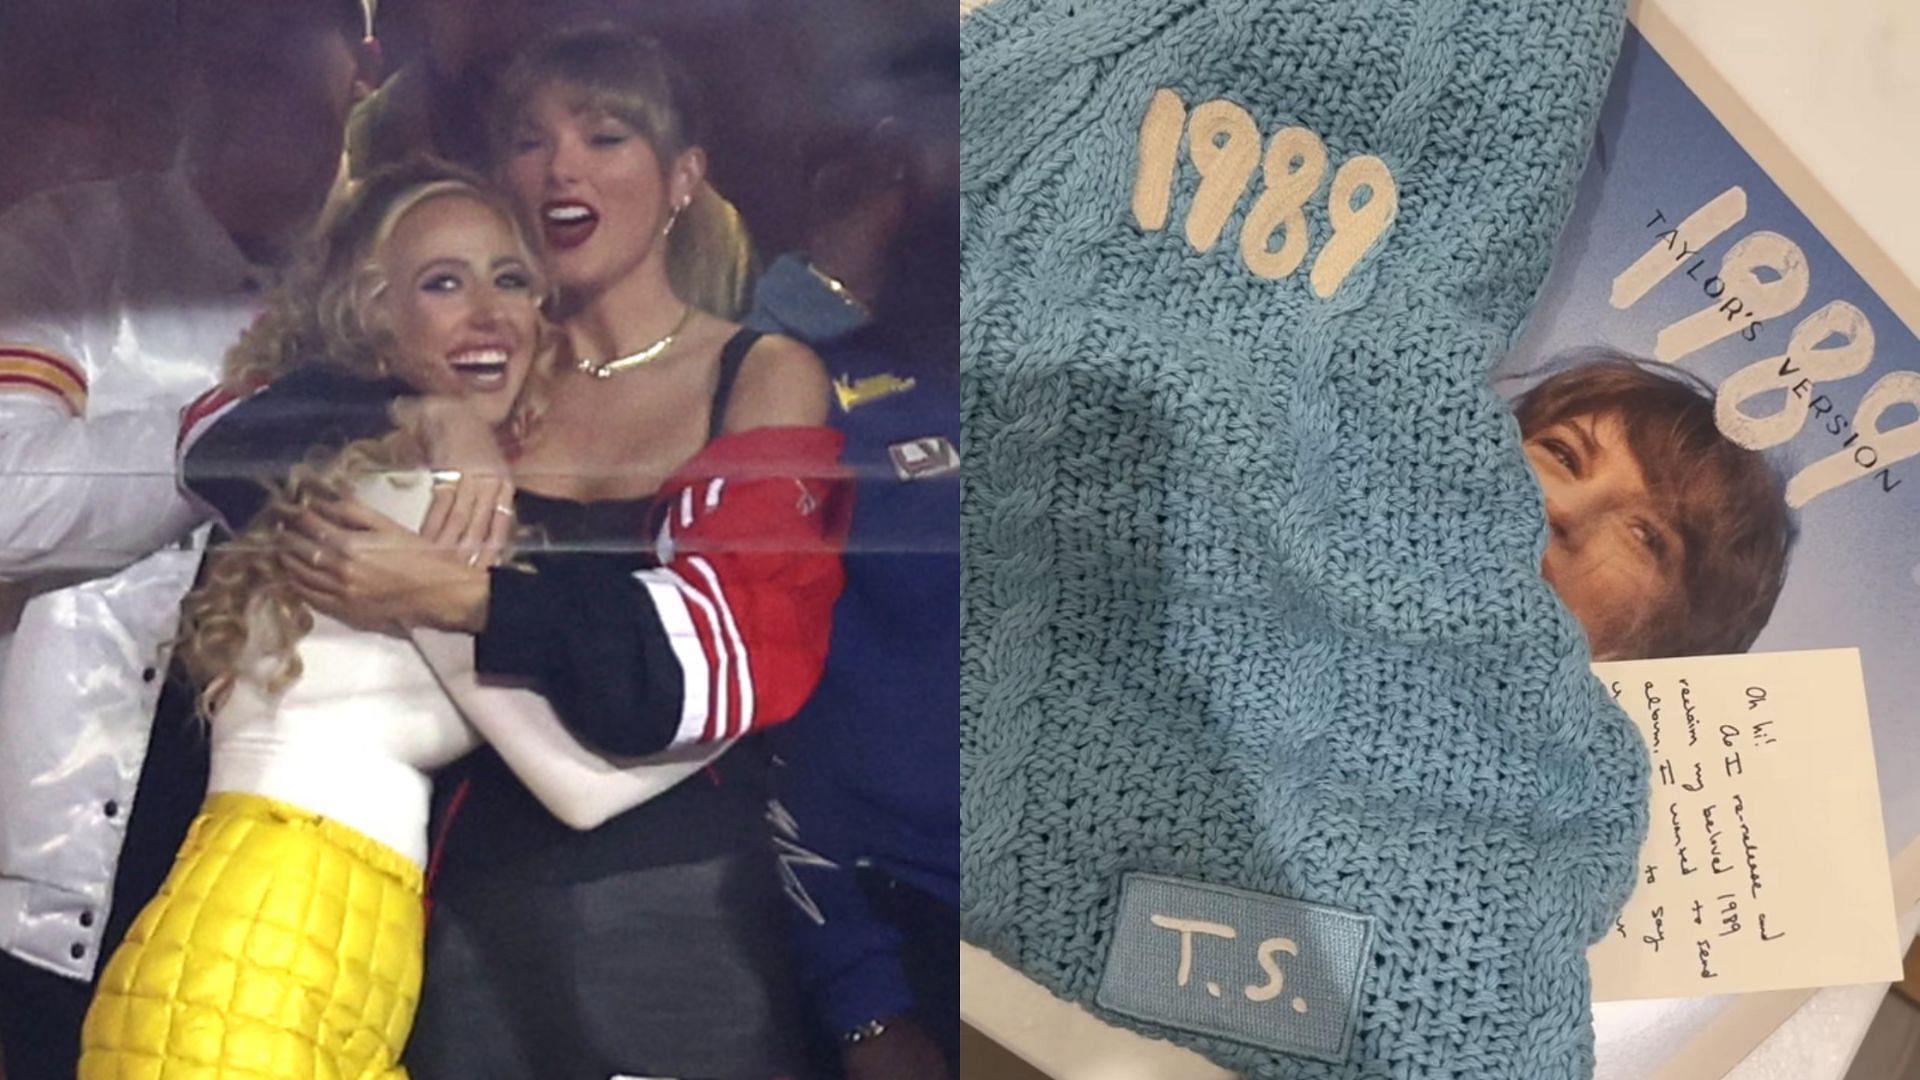 Fans wonder what Brittany Mahomes will do with Taylor Swift